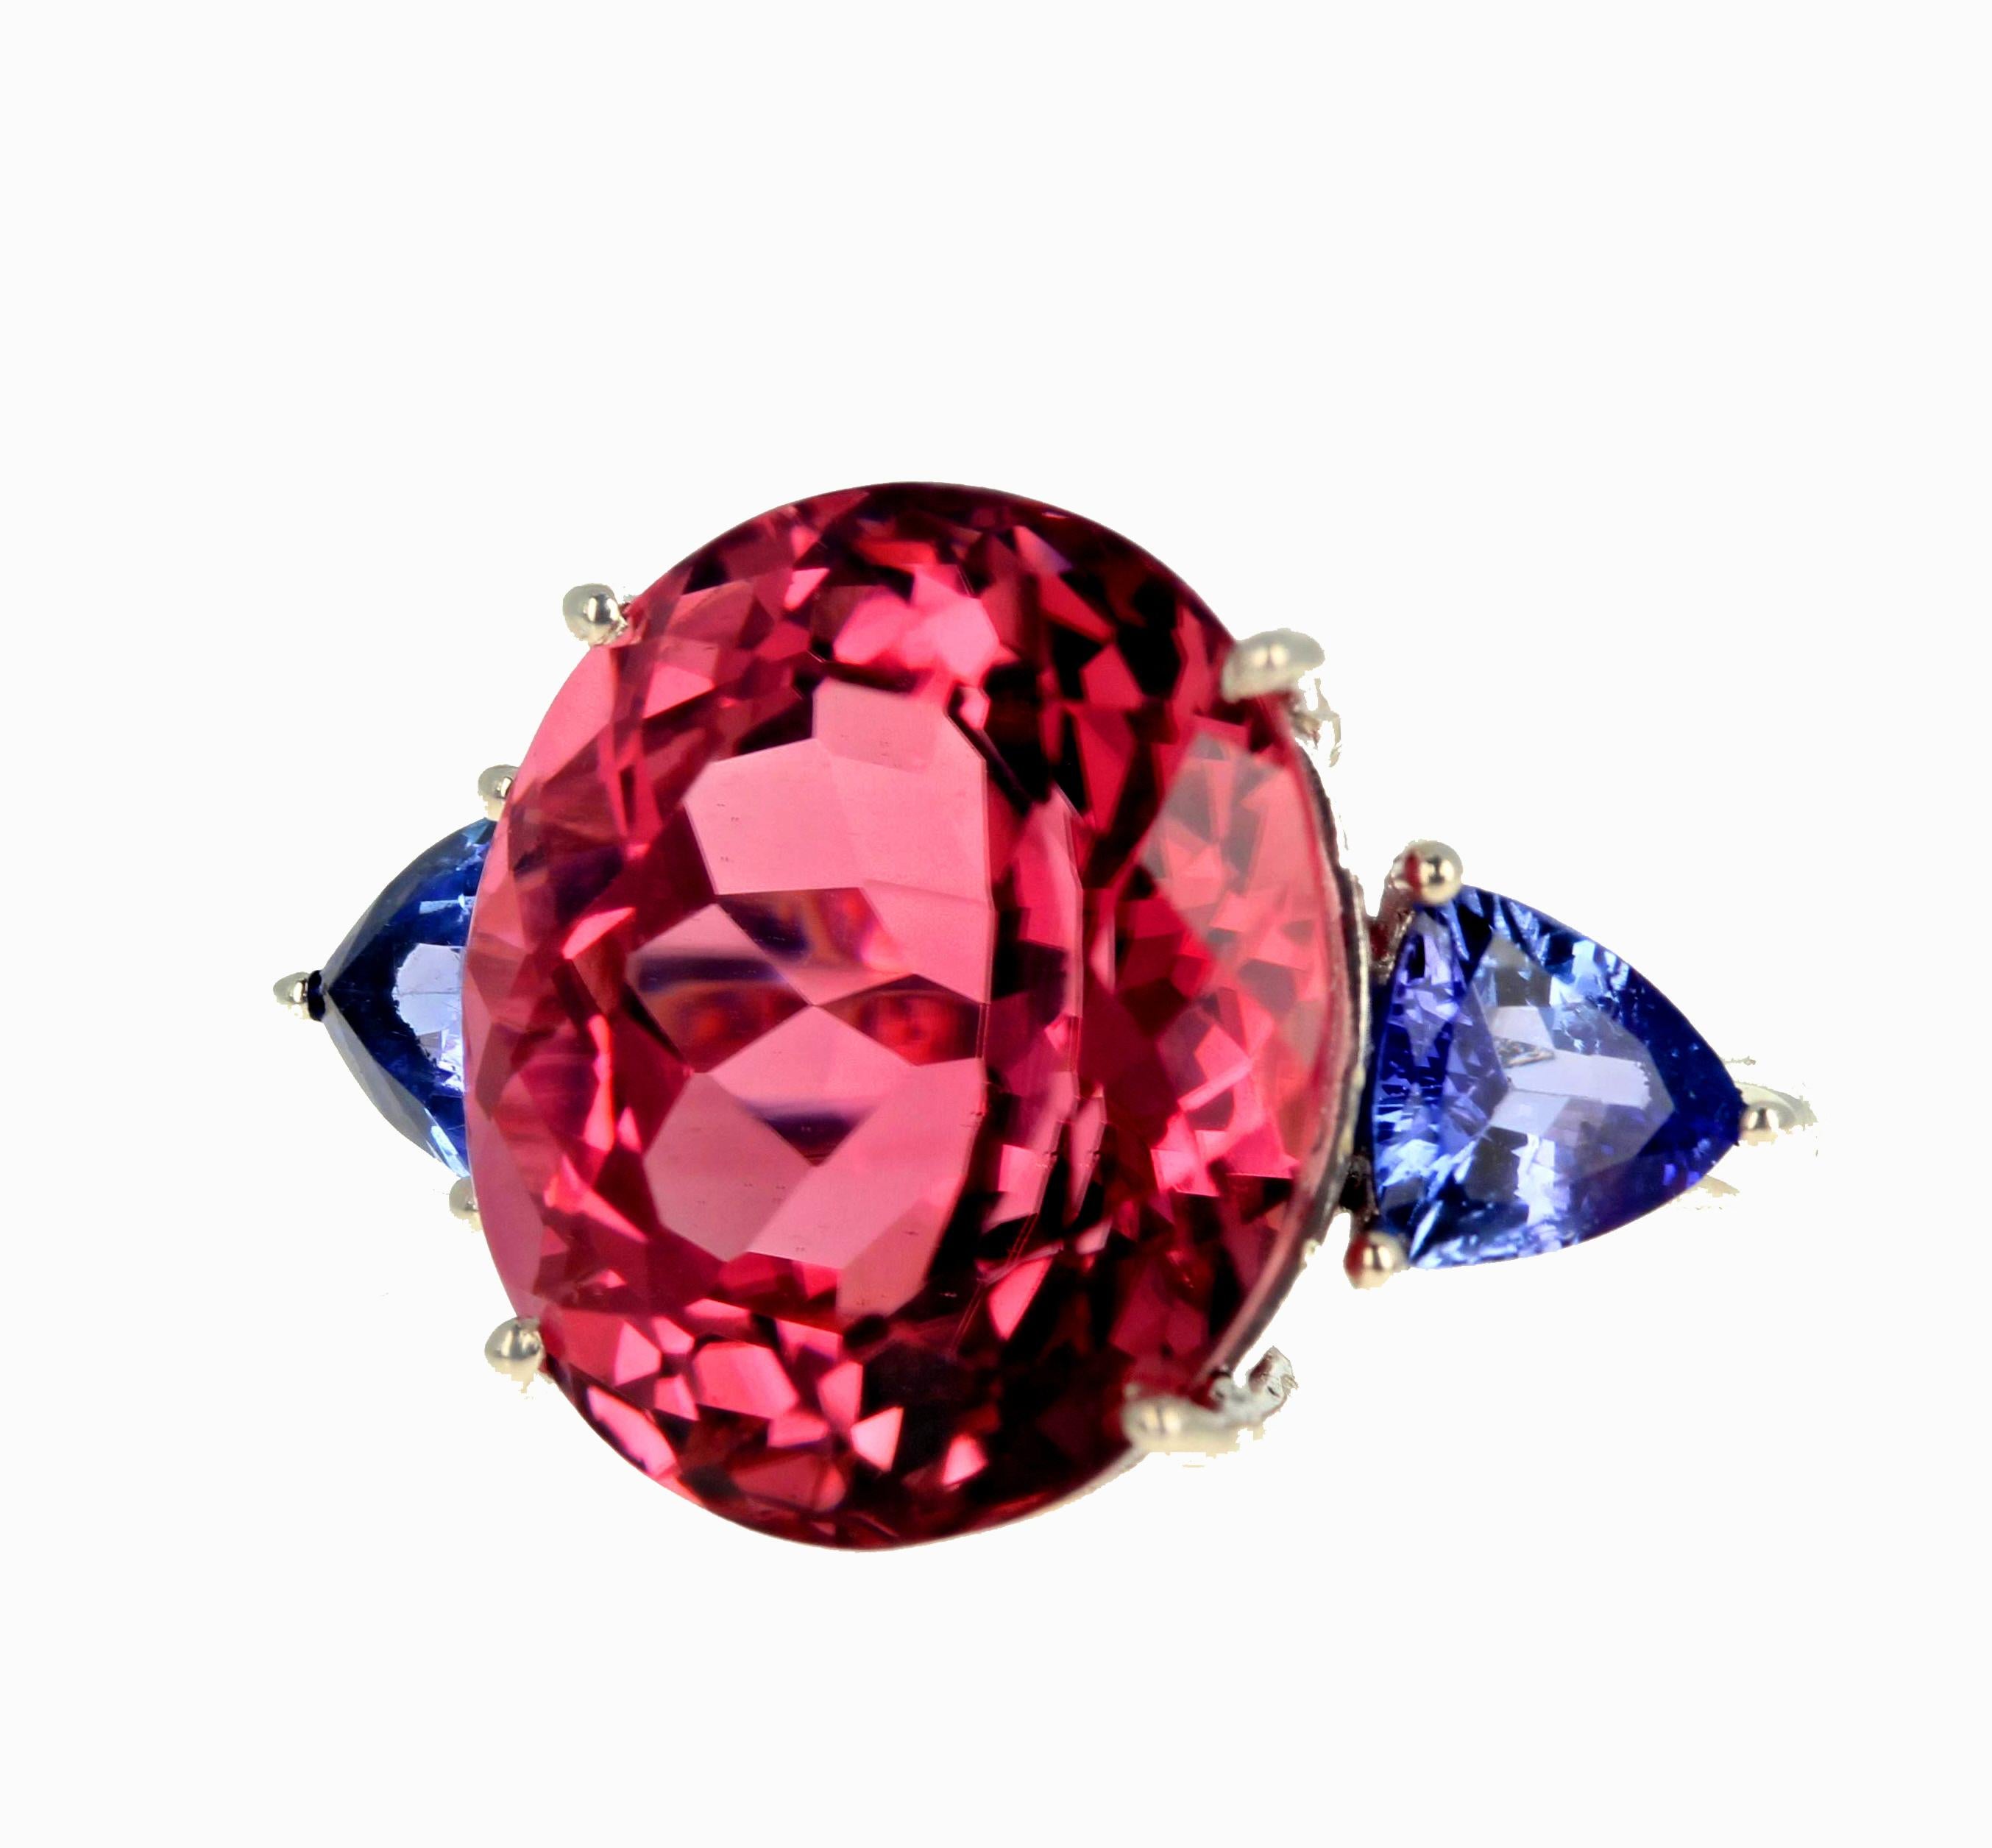 AJD Amazingly Intensely Pink 15.7 Carat 